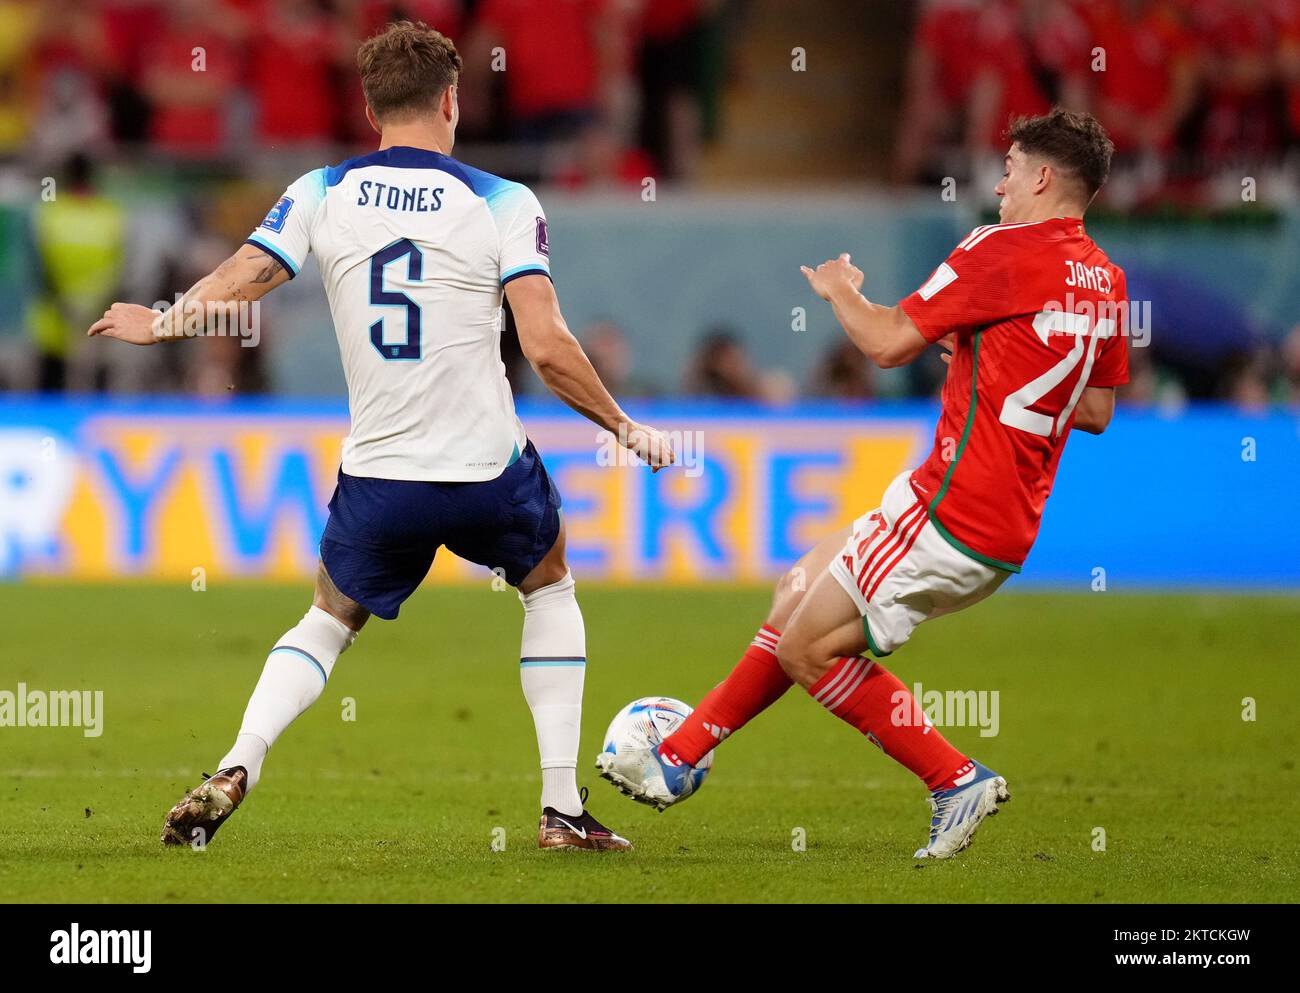 Wales' Daniel James challenges England's John Stones, resulting in a yellow card during the FIFA World Cup Group B match at the Ahmad Bin Ali Stadium, Al Rayyan, Qatar. Picture date: Tuesday November 29, 2022. Stock Photo